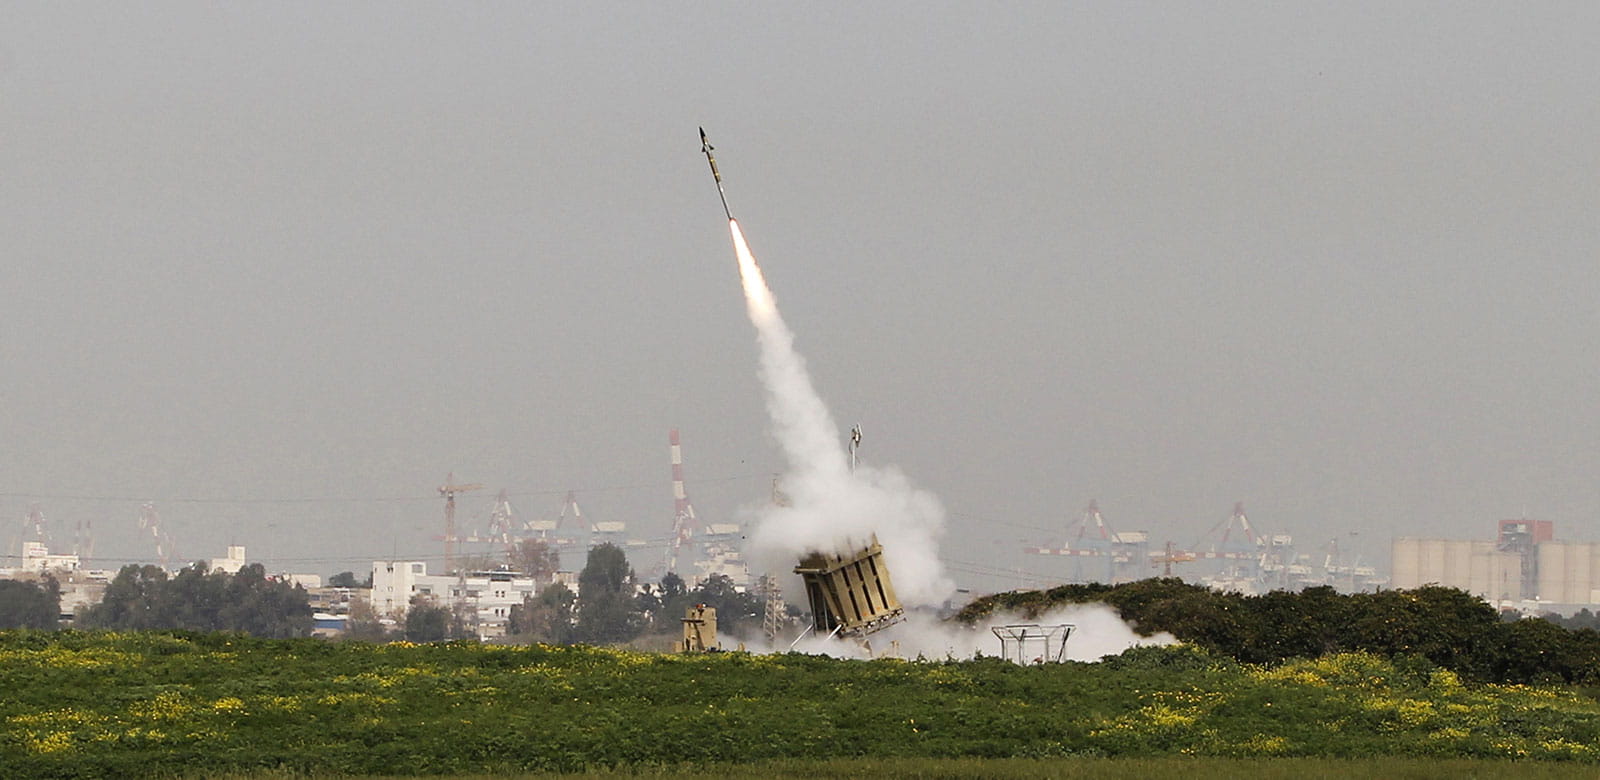 Missile being launched from ground